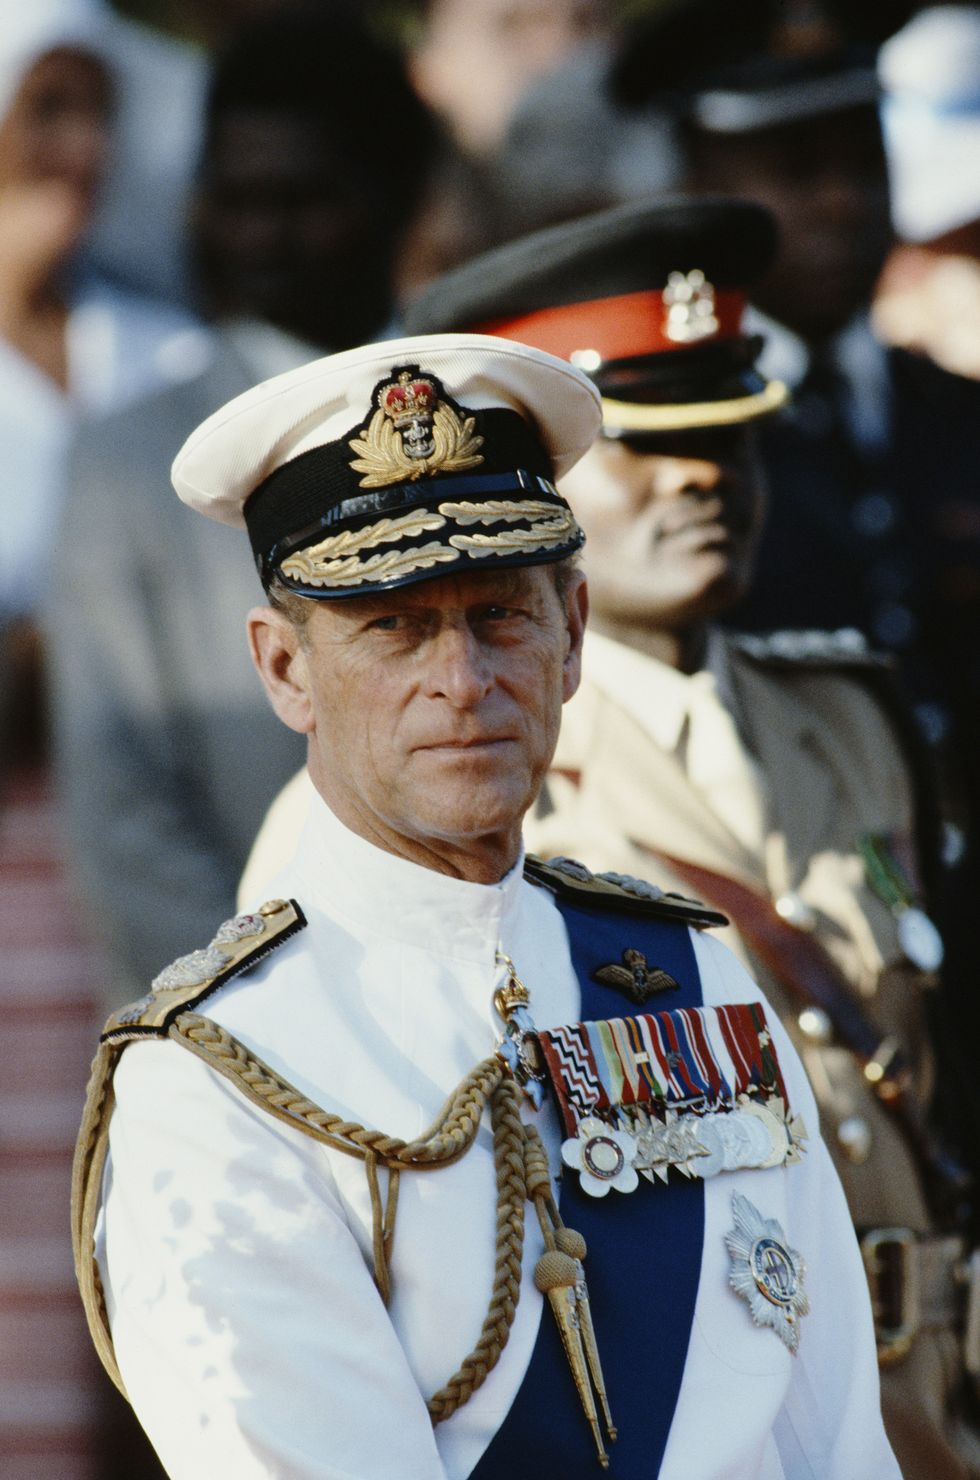 prince philip, duke of edinburgh in his tropical naval uniform in papua new guinea, october 1982 photo by tim graham photo library via getty images